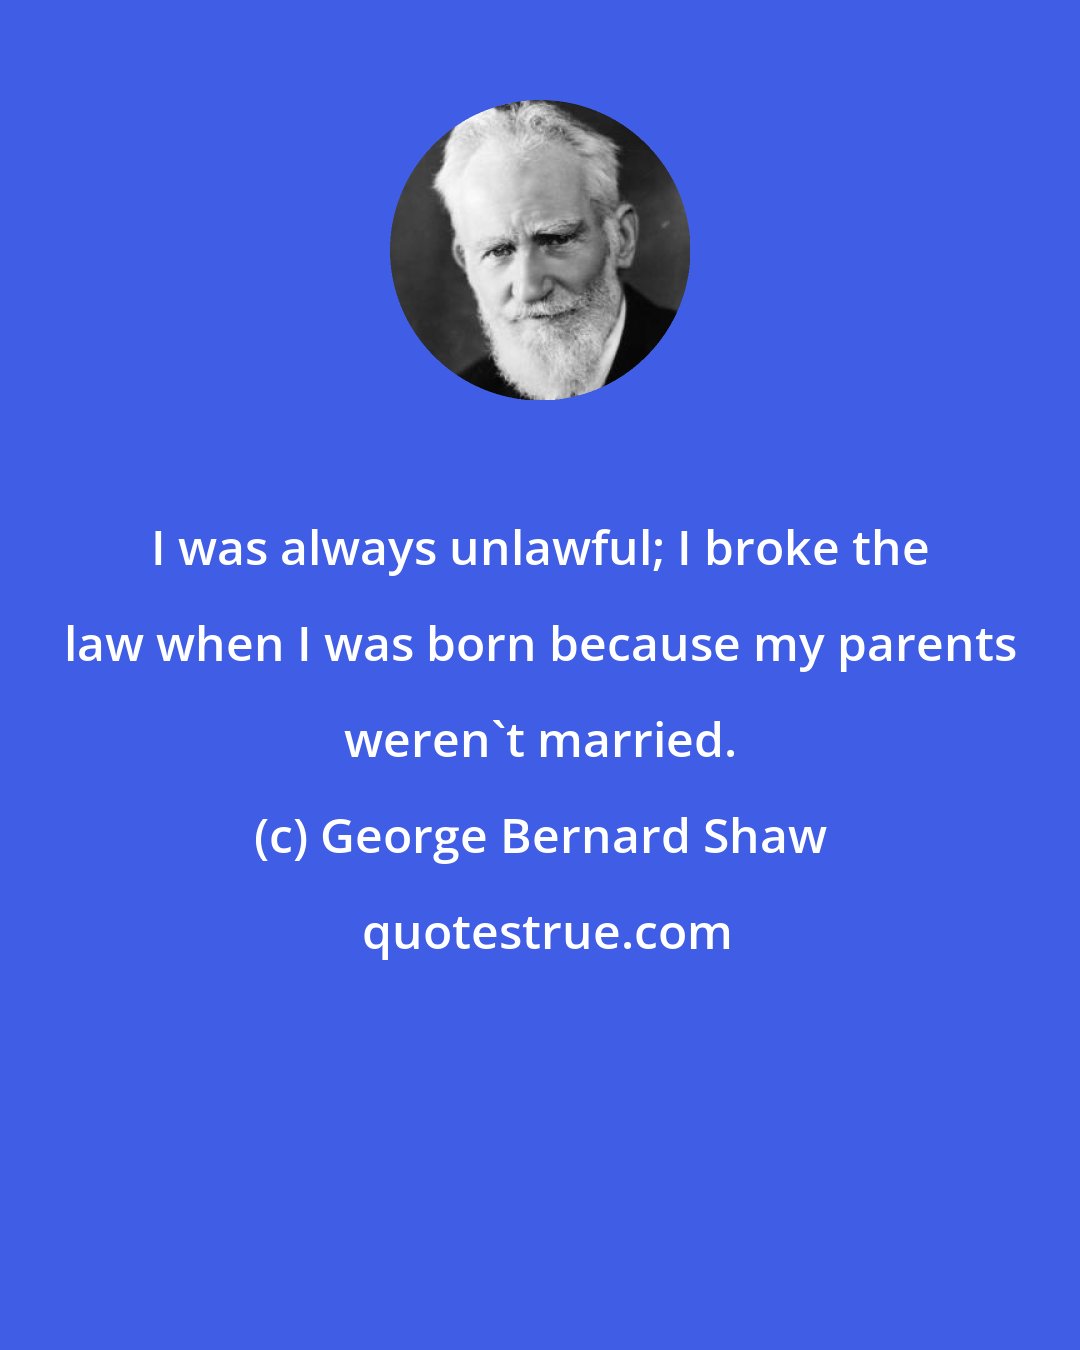 George Bernard Shaw: I was always unlawful; I broke the law when I was born because my parents weren't married.